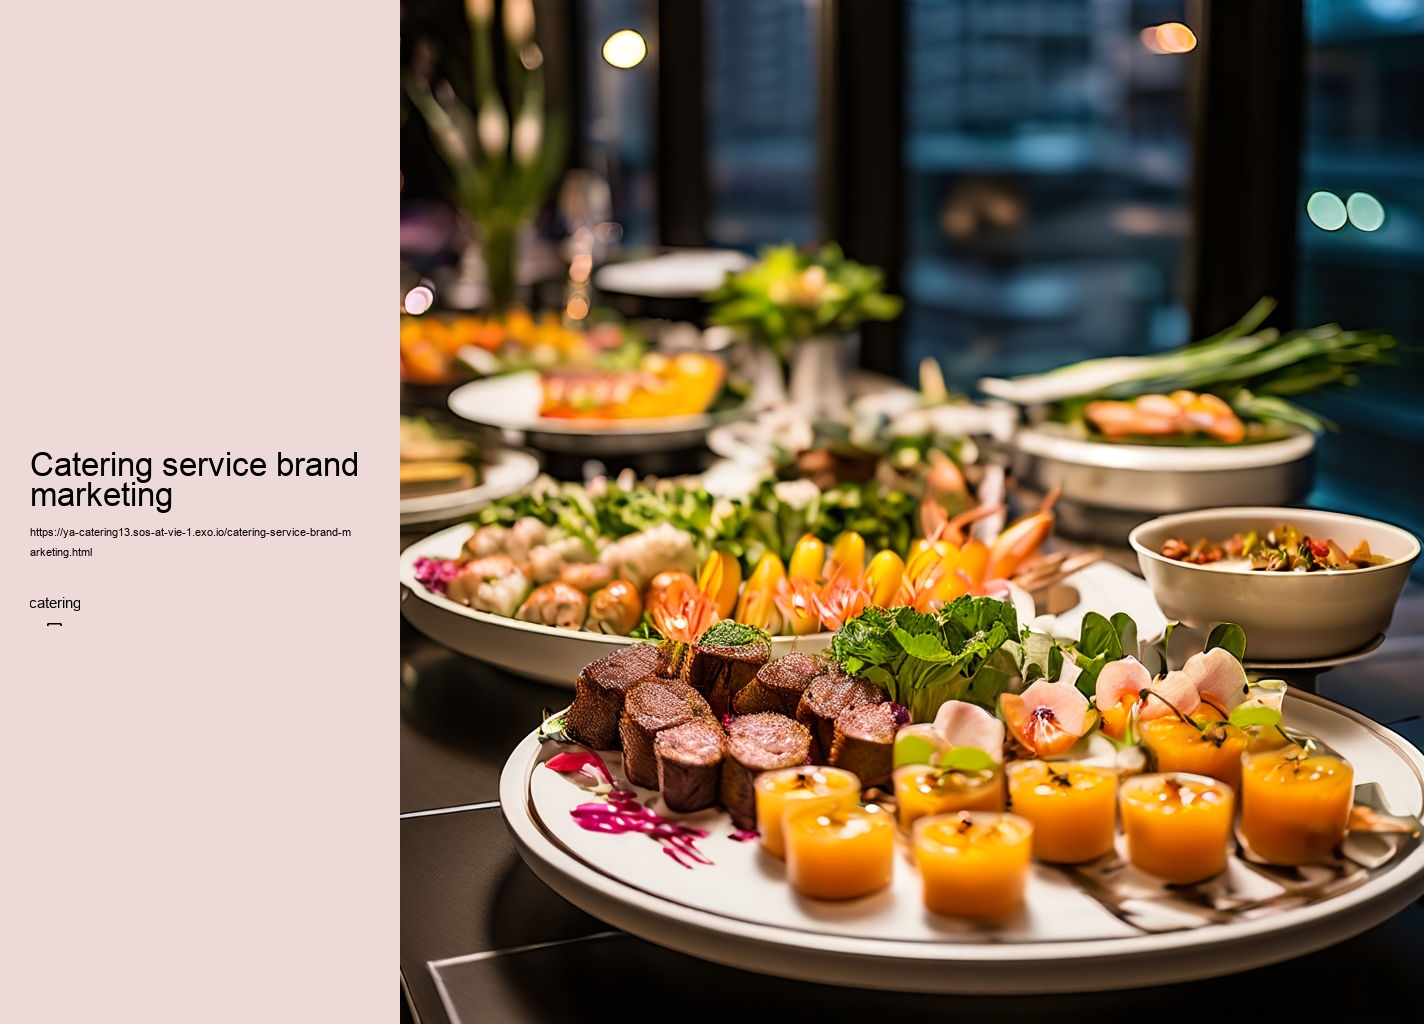 Catering service brand marketing